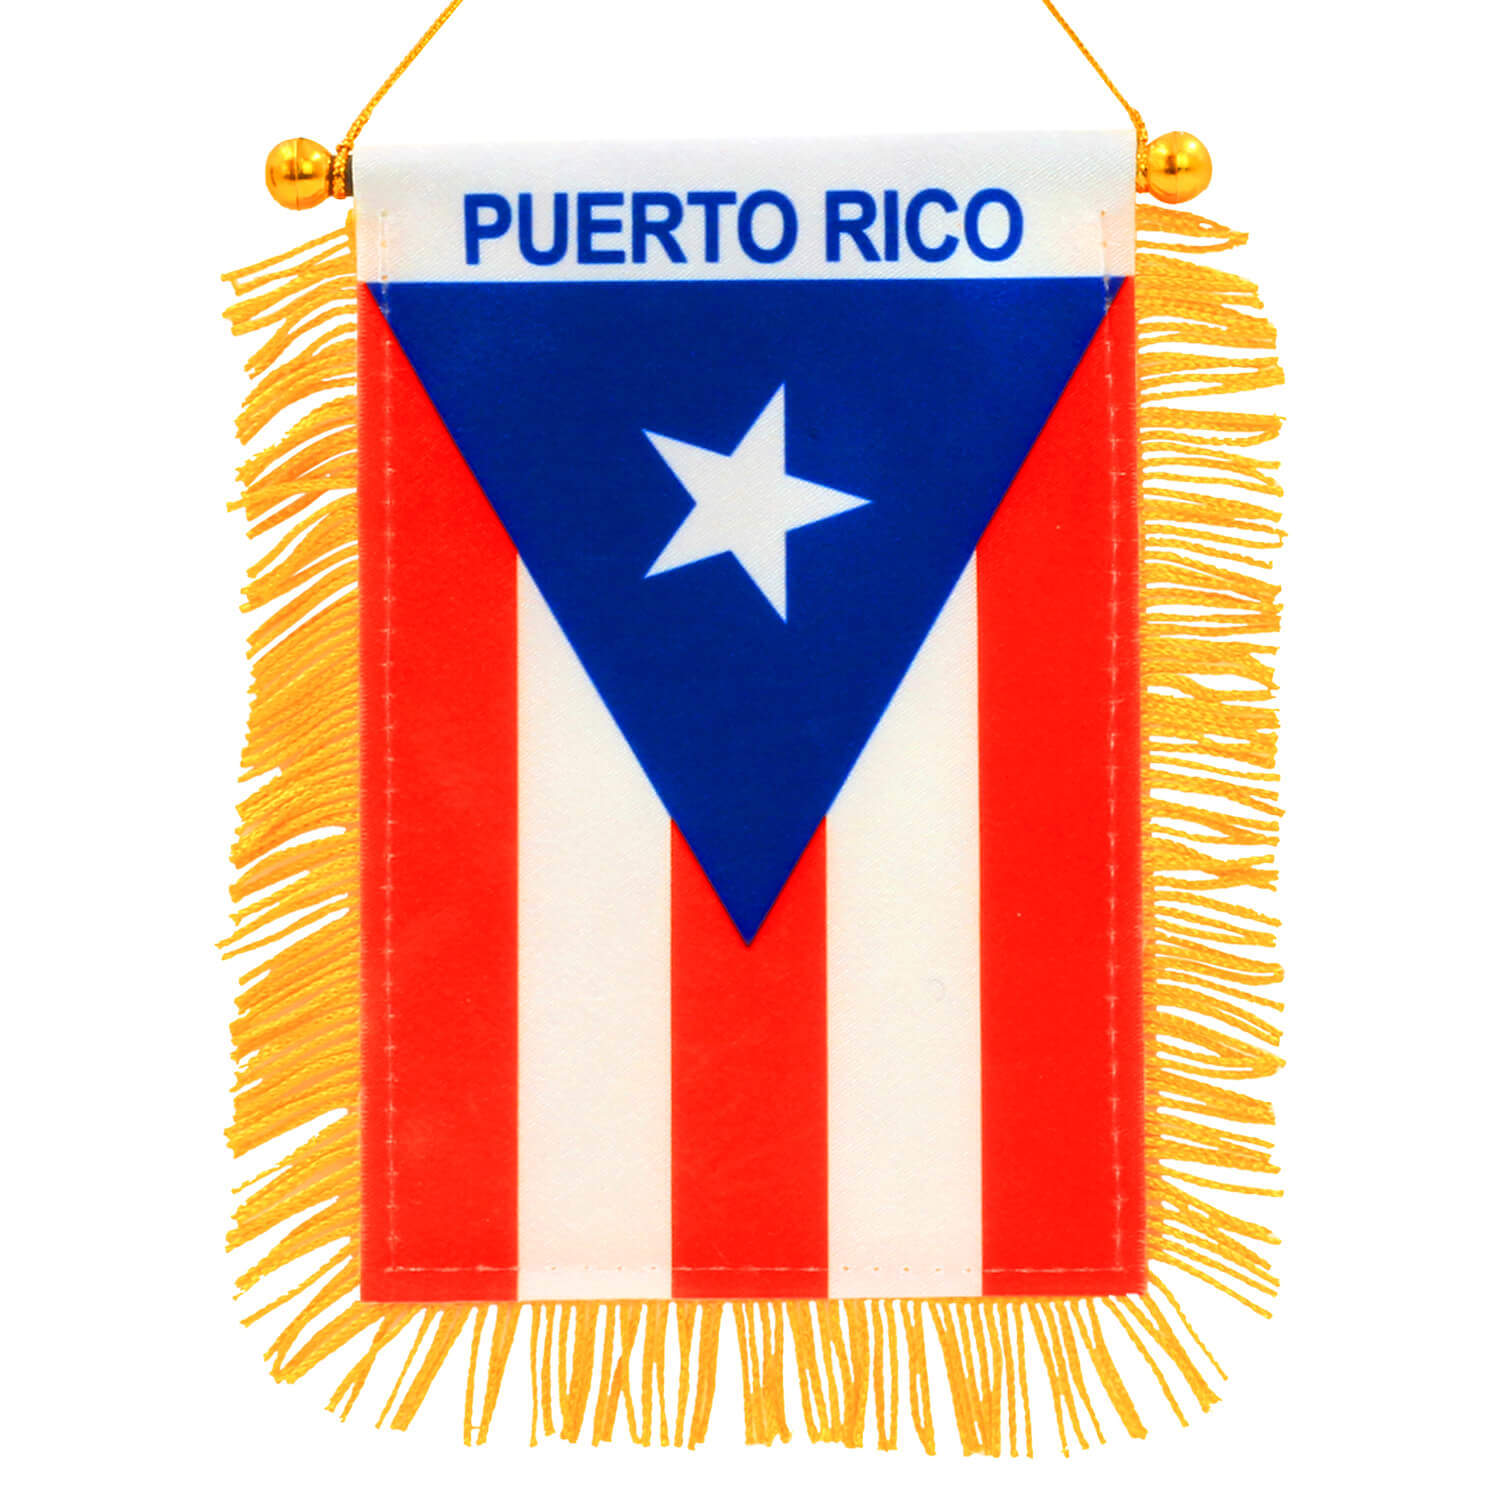 UNITY FLAGZ Puerto RICO and Panama Boricua Panamanian Caribbean South American Rear View Mirror Hanging CAR Flags Mini Banners for Inside The CAR